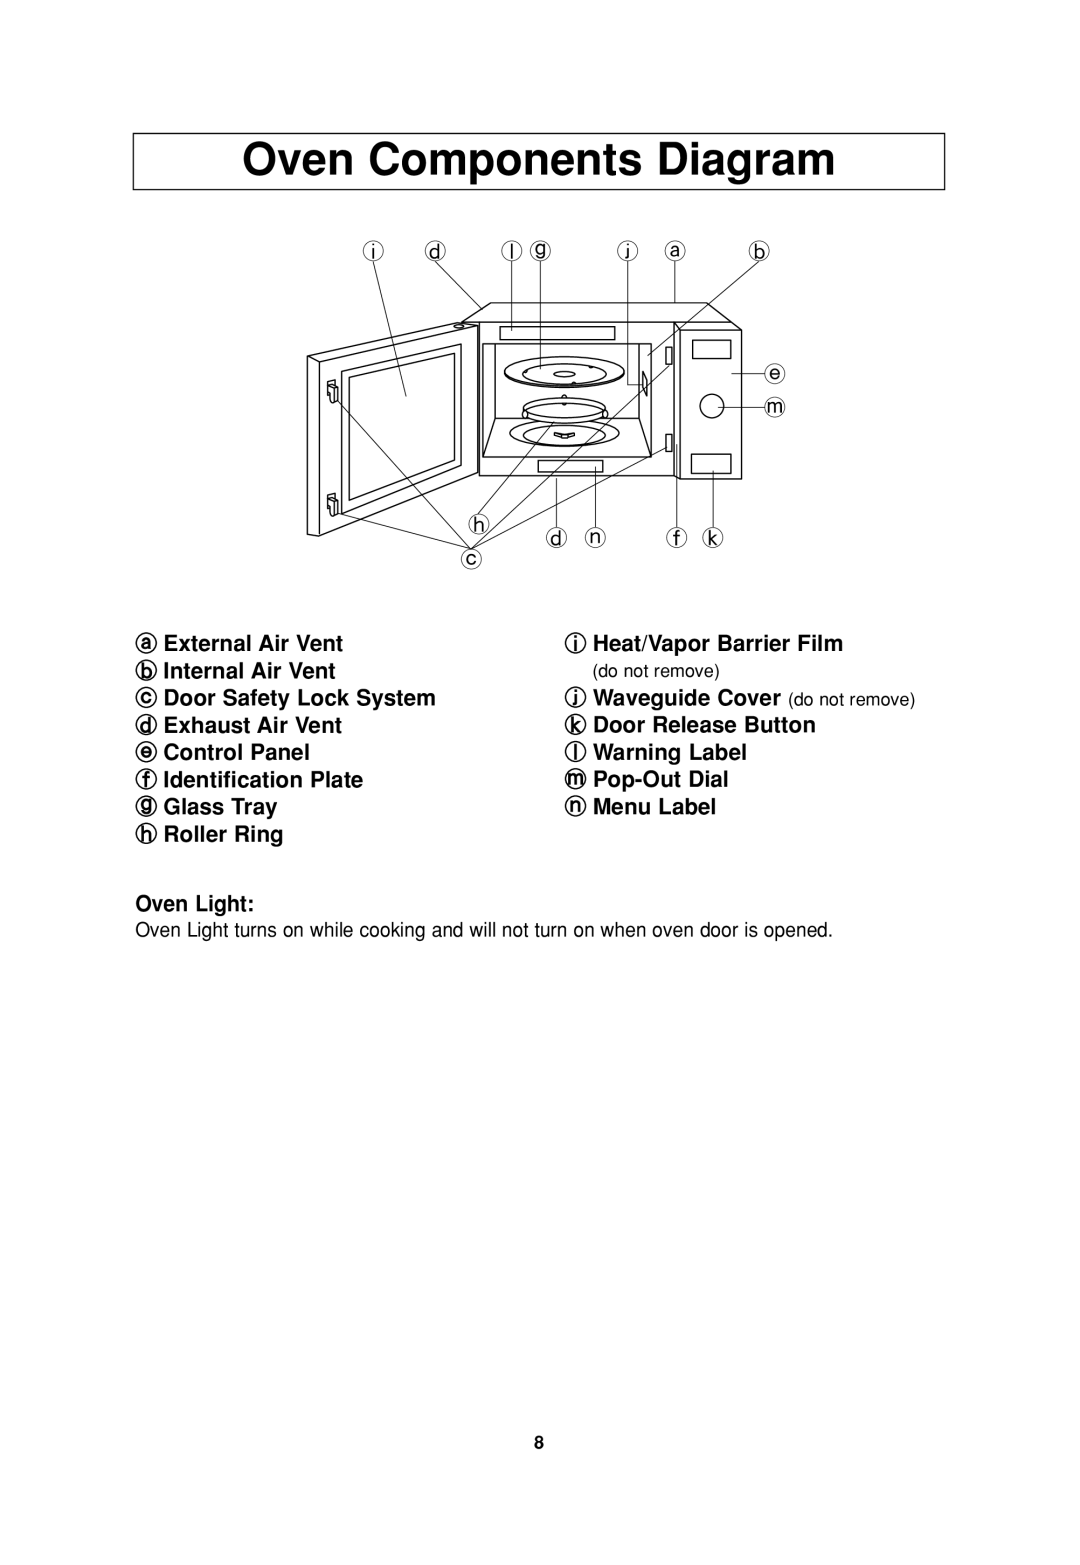 Panasonic NN-SD697S operating instructions Oven Components Diagram 